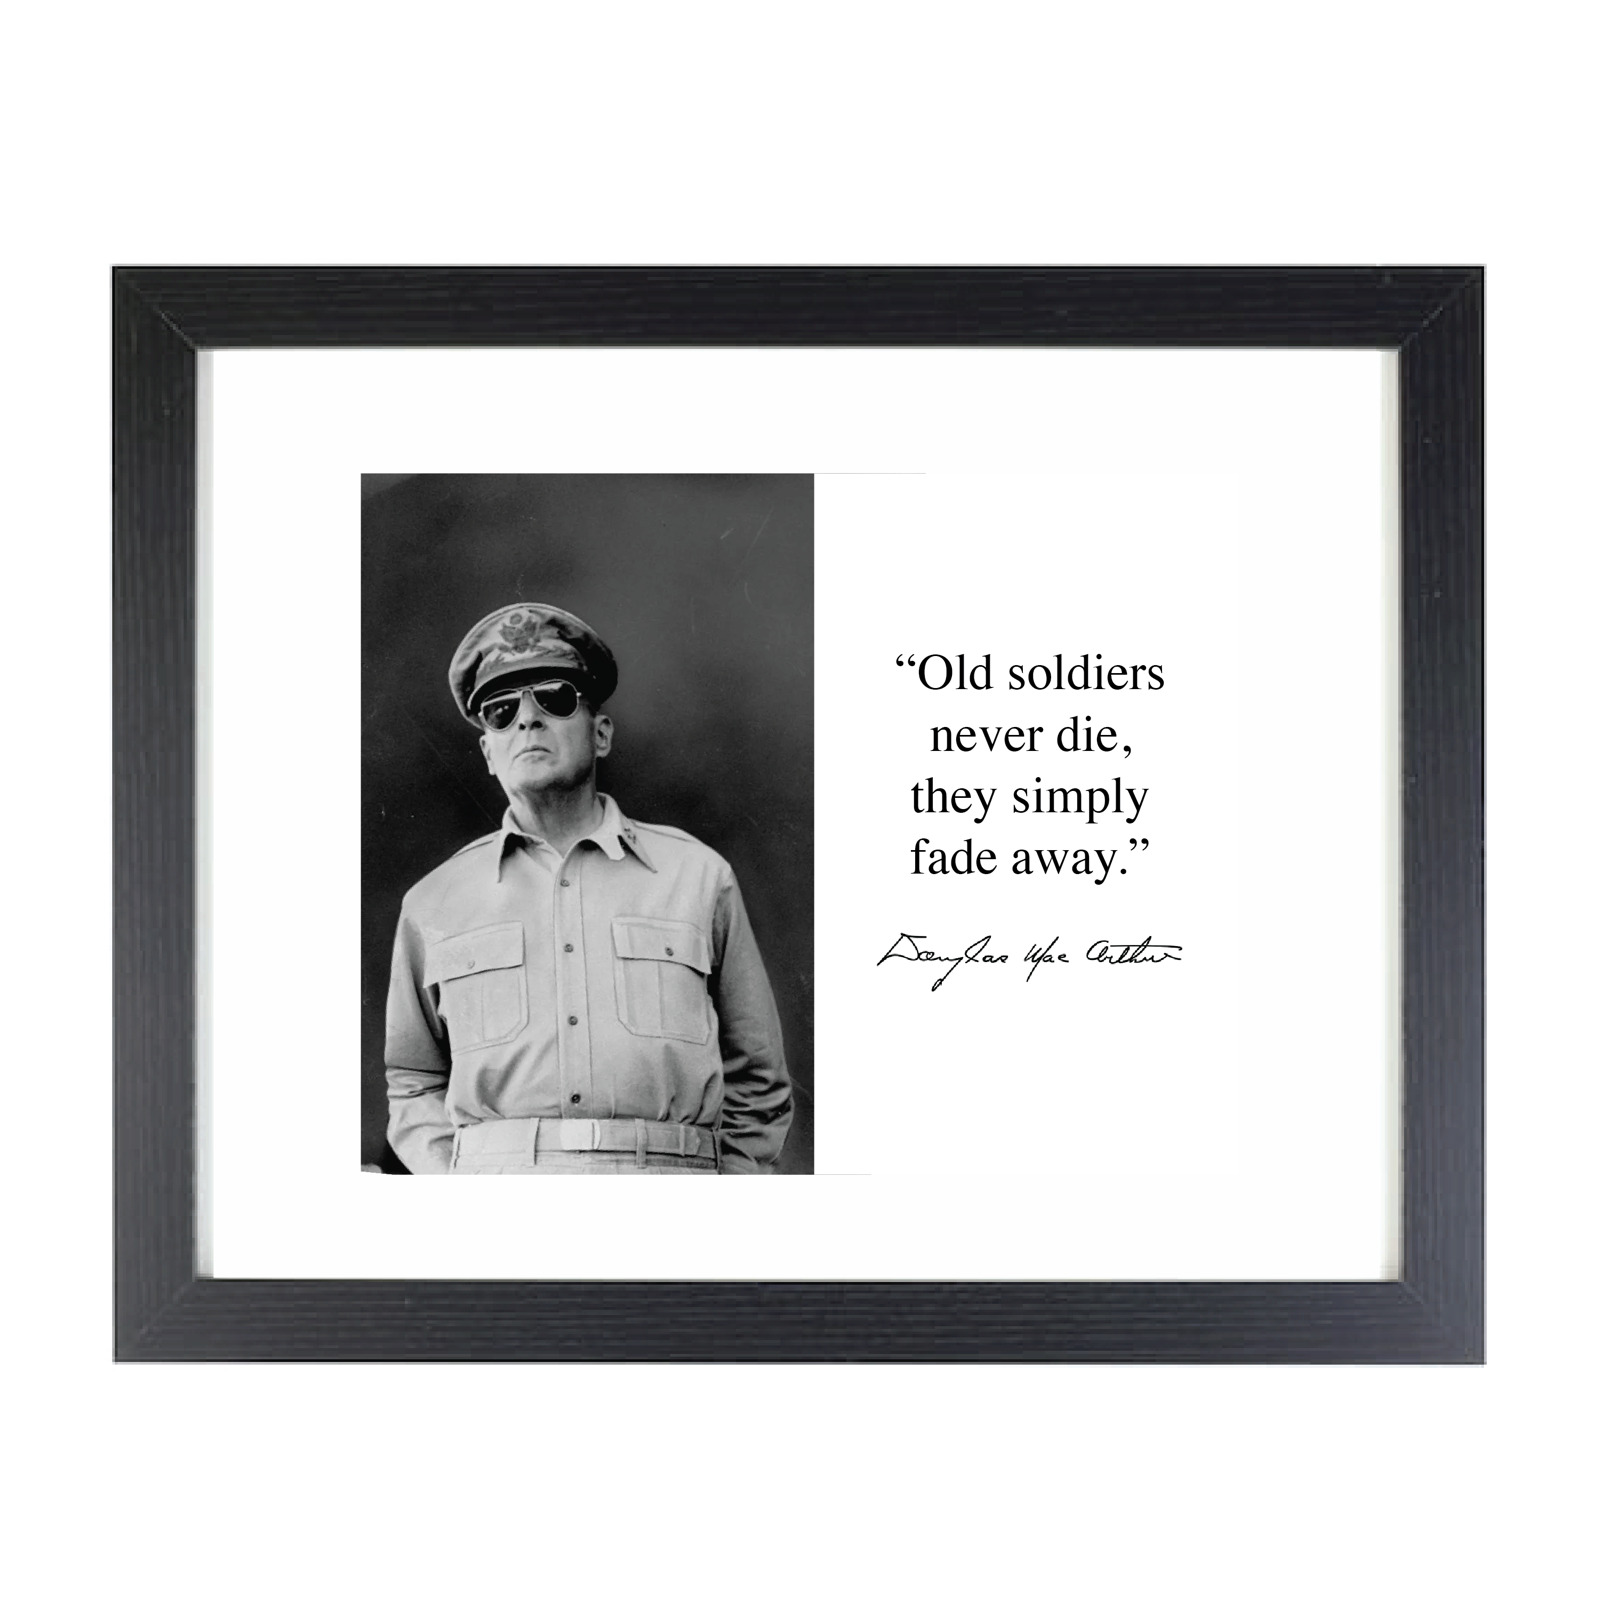 Douglas MacArthur WWII Old Soldiers Quote Facsimile 8X10 Reprint Framed Photo